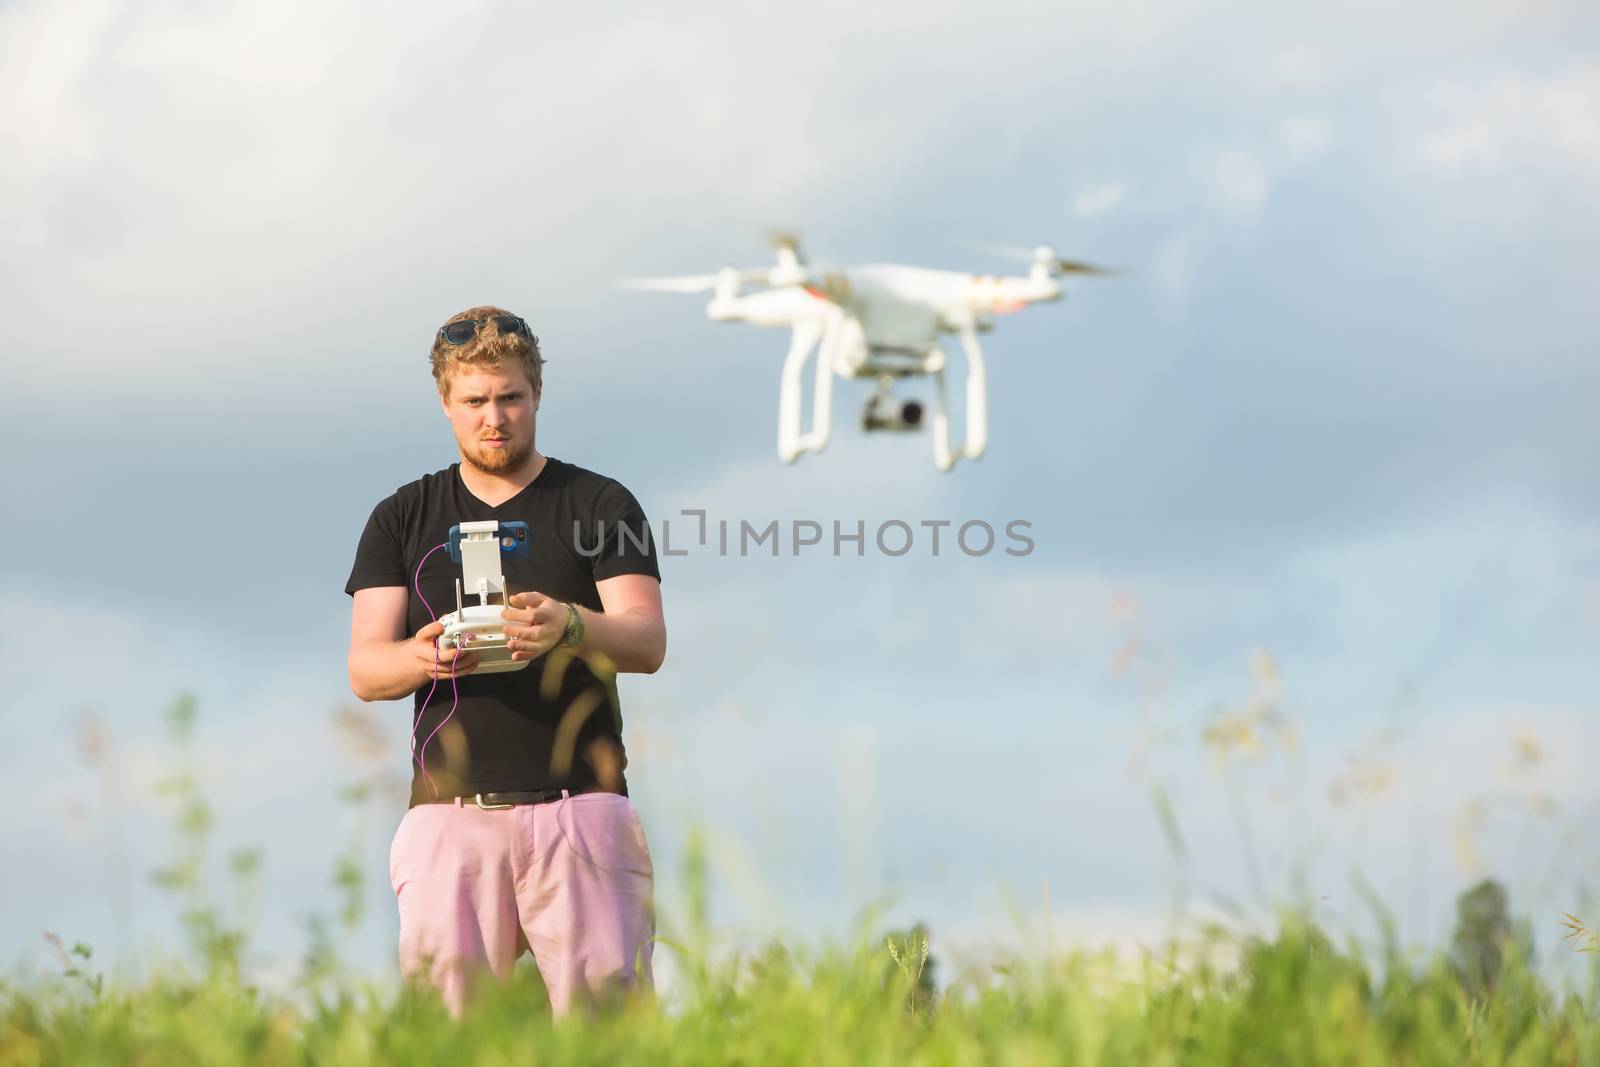 Man outdoors with remote control and flying surveillance drone